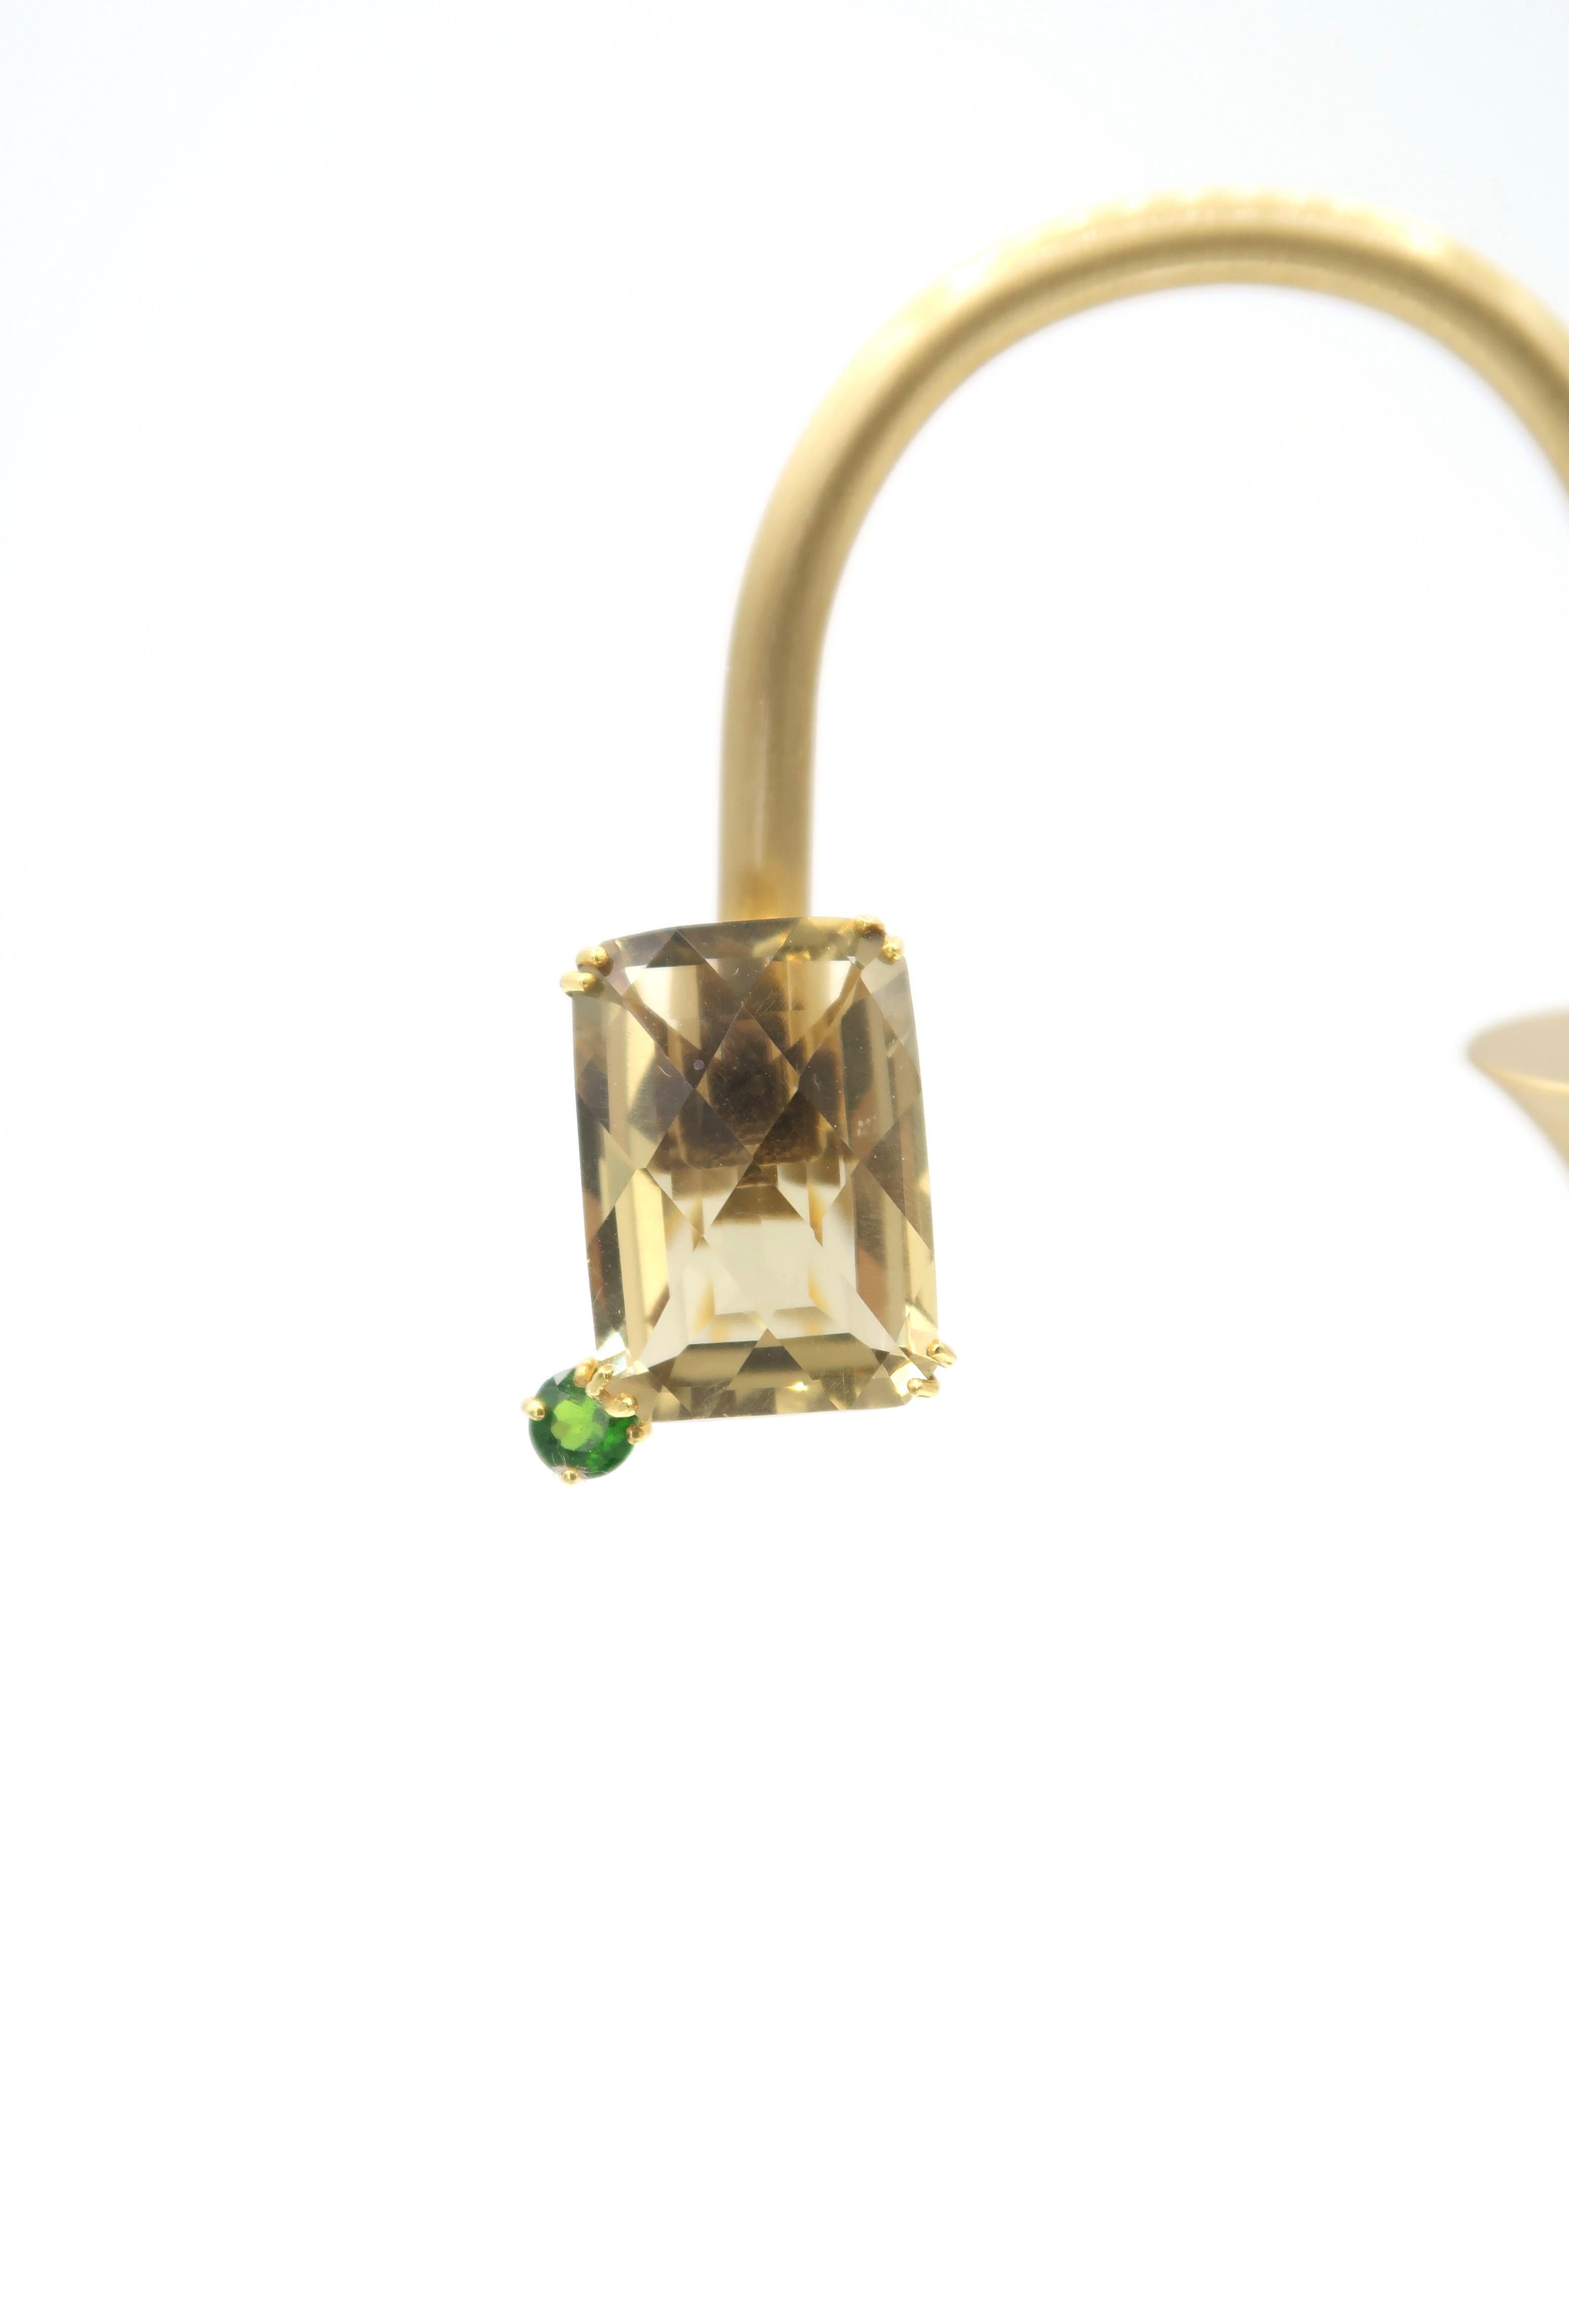 Nonidentical 30 Carats Single Citrine and Lemon Quartz Omega Clip Earrings in 18K Yellow Gold adorned with Tsavorite

The earrings come with omega backs. Posts are removable upon request for non-pierced ears.

Tsavorite: 1.22 ct
Citrine and Lemon